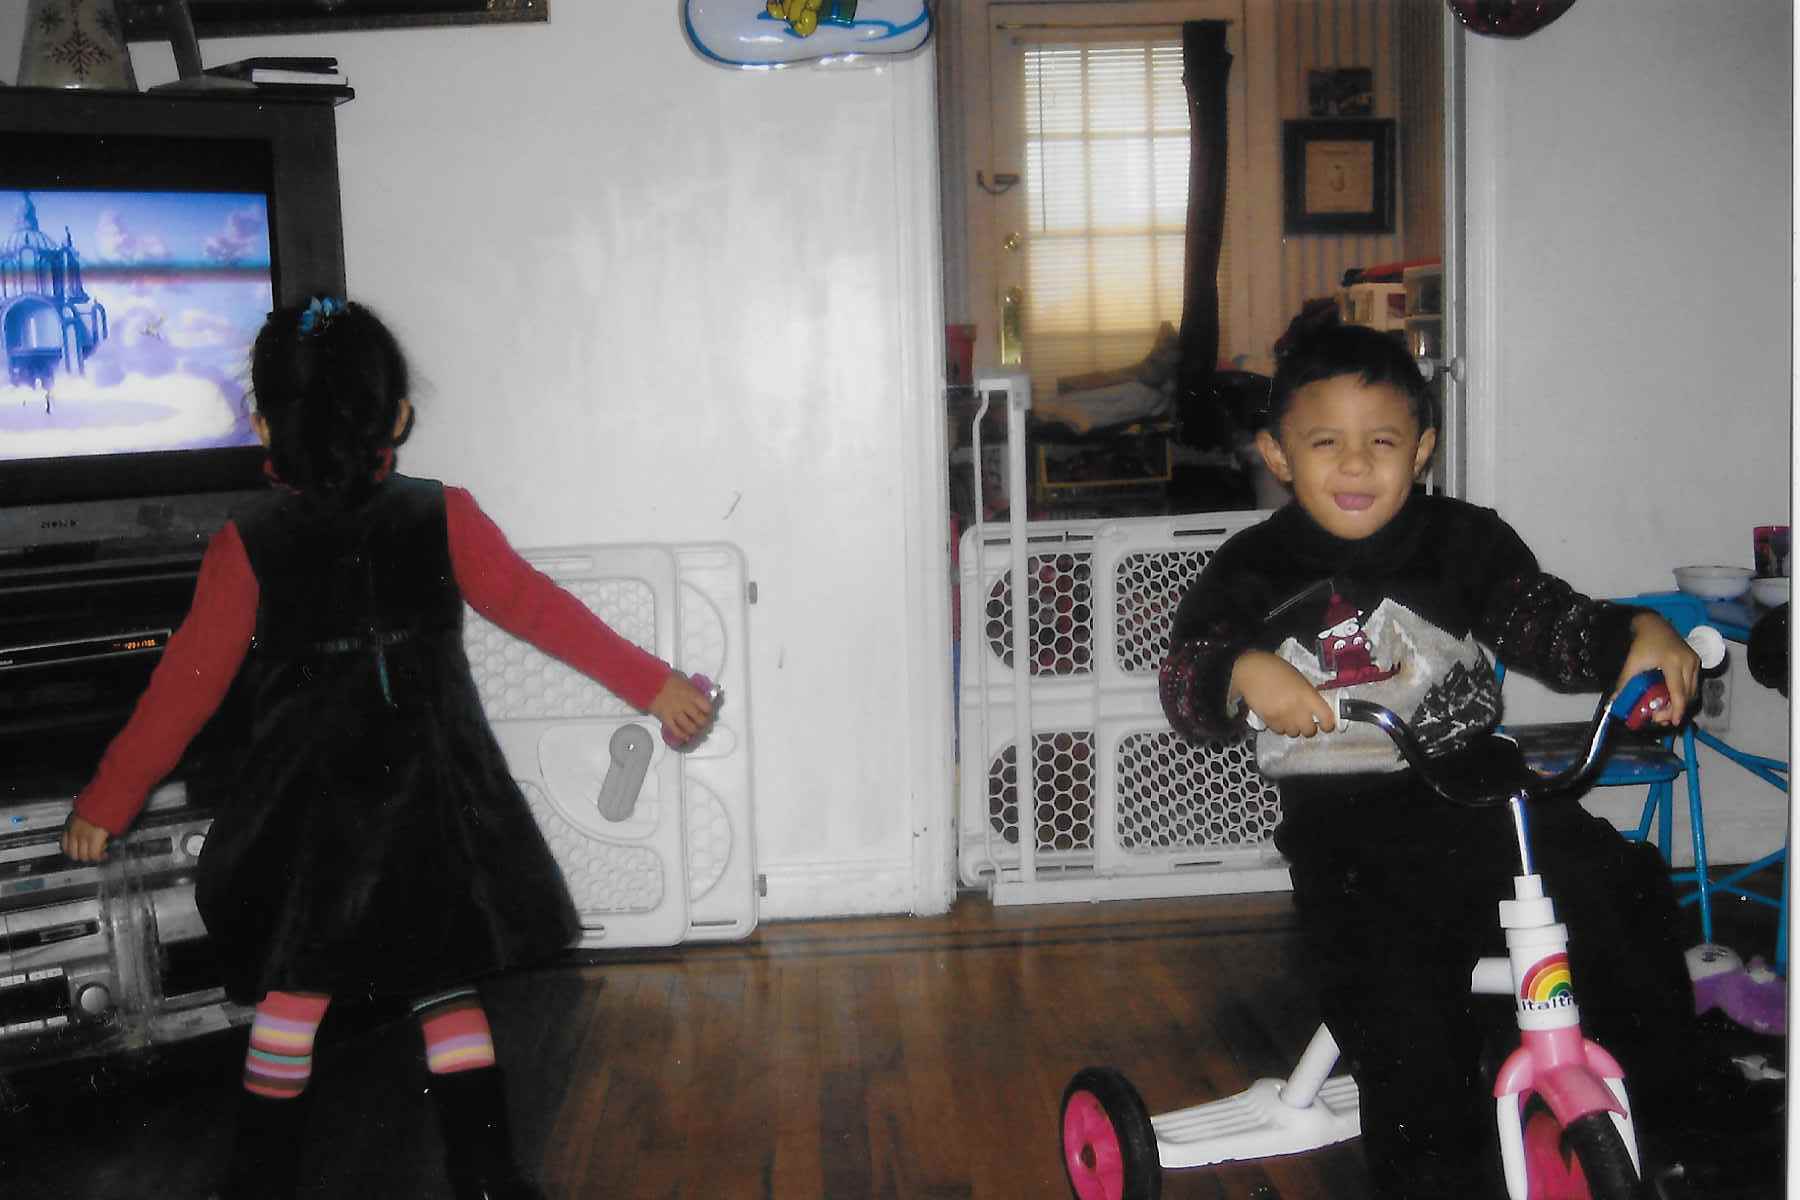 A little girl stands in front of a TV so her back is facing the camera. Her twin brother is looking at the camera with a scrunched face while riding a tricyle inside their family's living room.